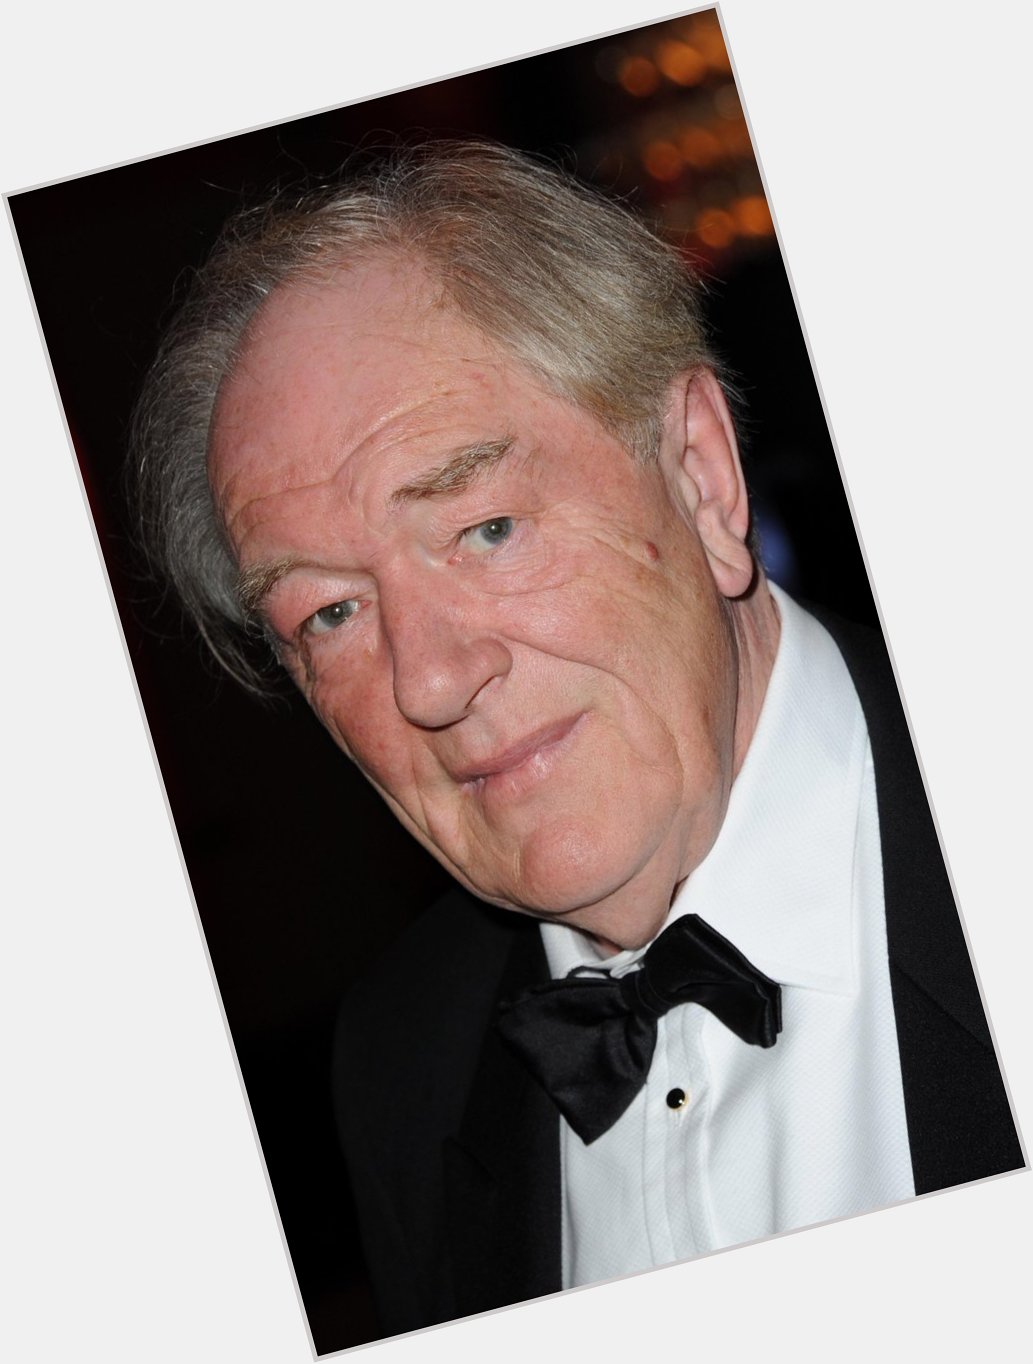 Happy 75th Birthday to Michael Gambon, otherwise known as Dumbledore! I\m going to watch some Harry Potter movies! 